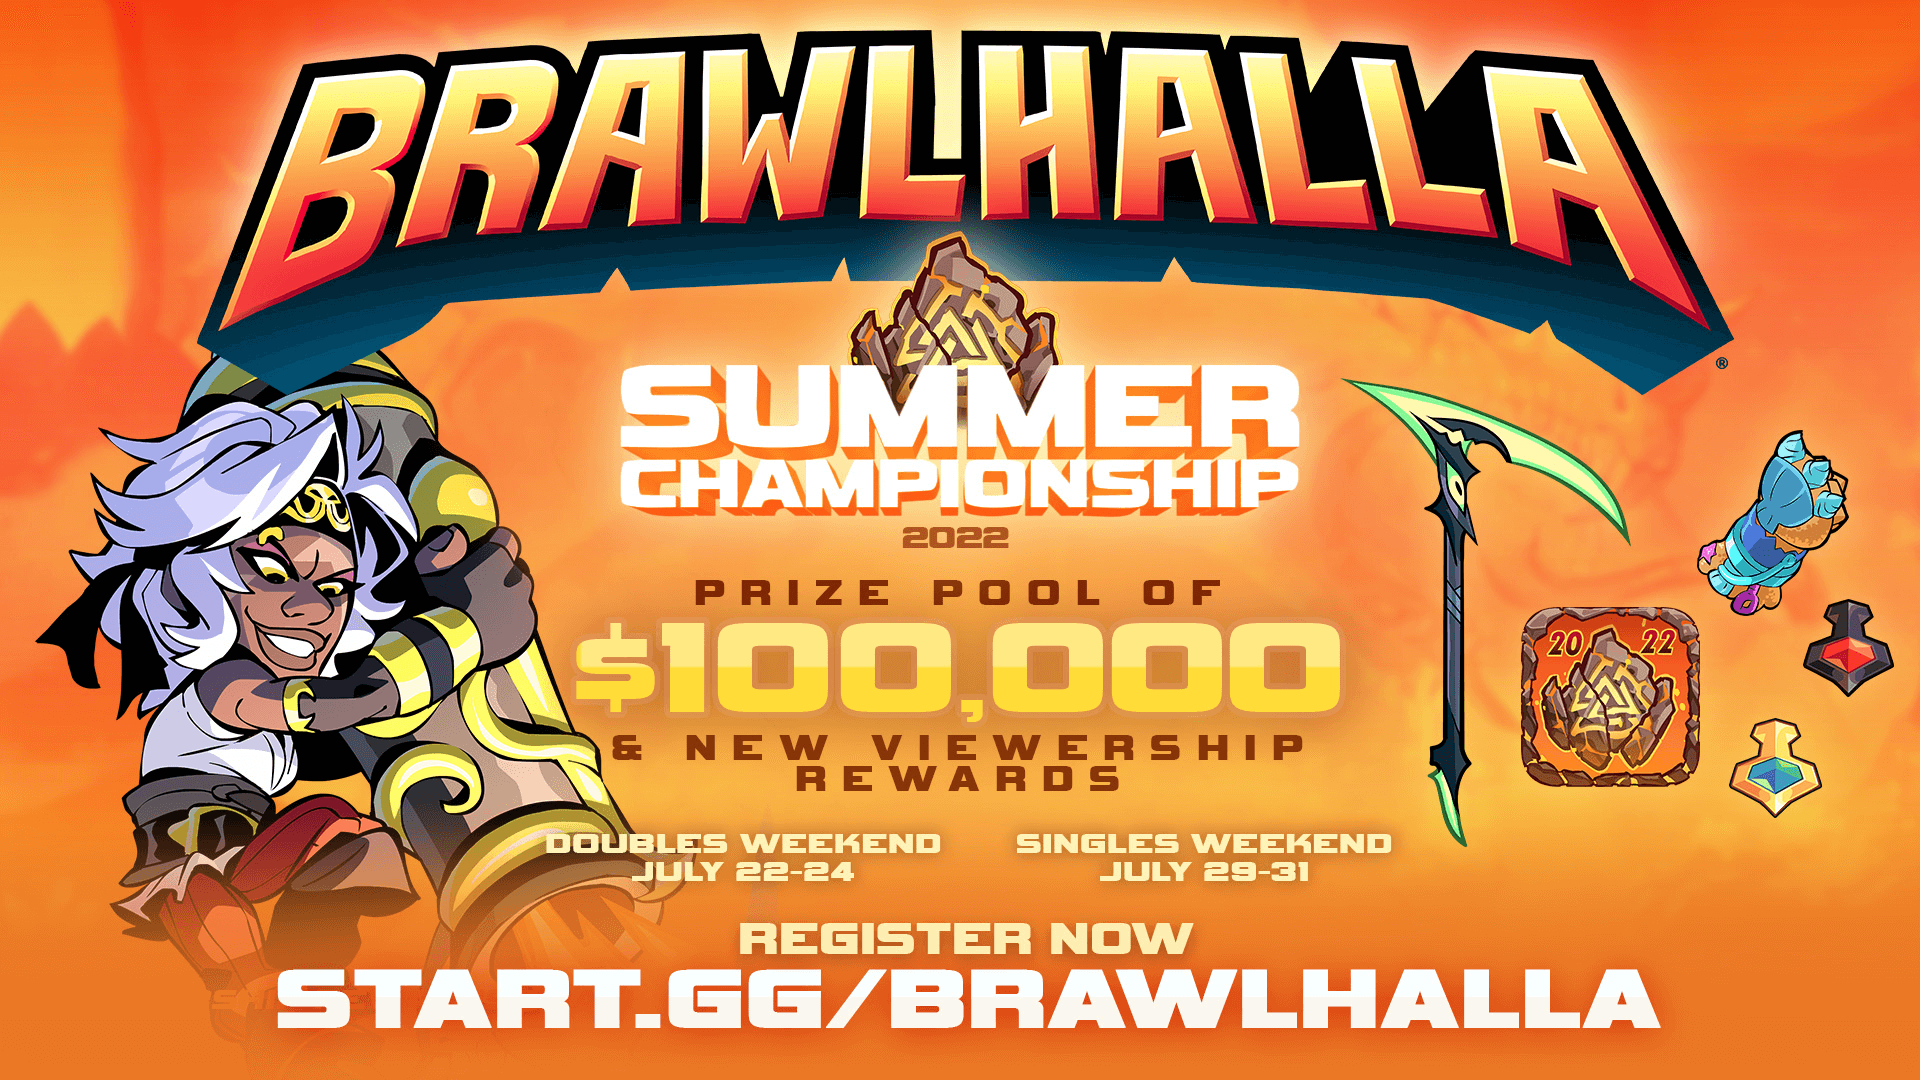 Brawlhalla Summer Championship: Time to Sign Up